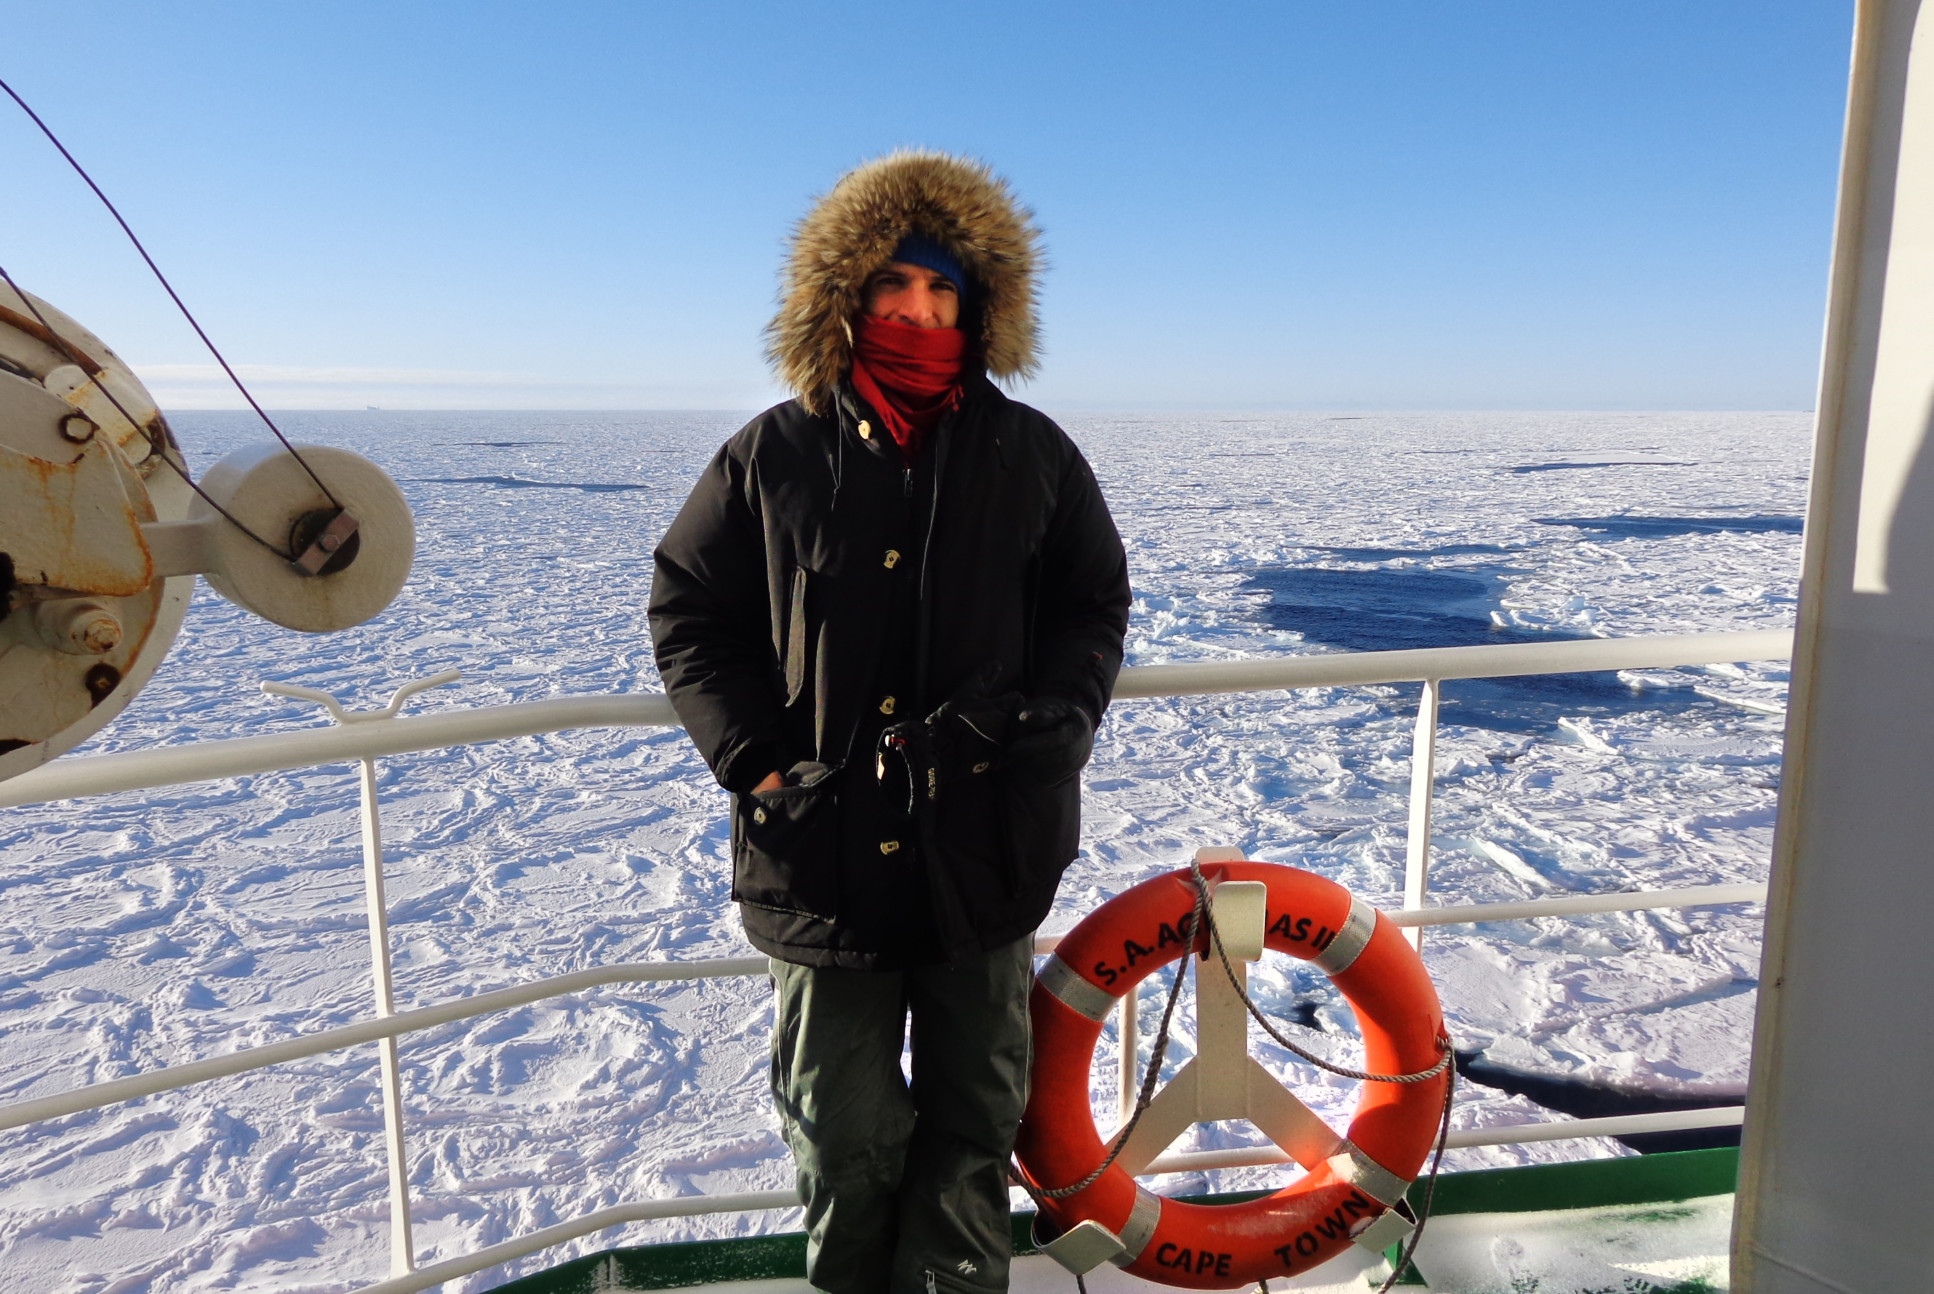 The subject of the article standing on a boat surrounded by ice